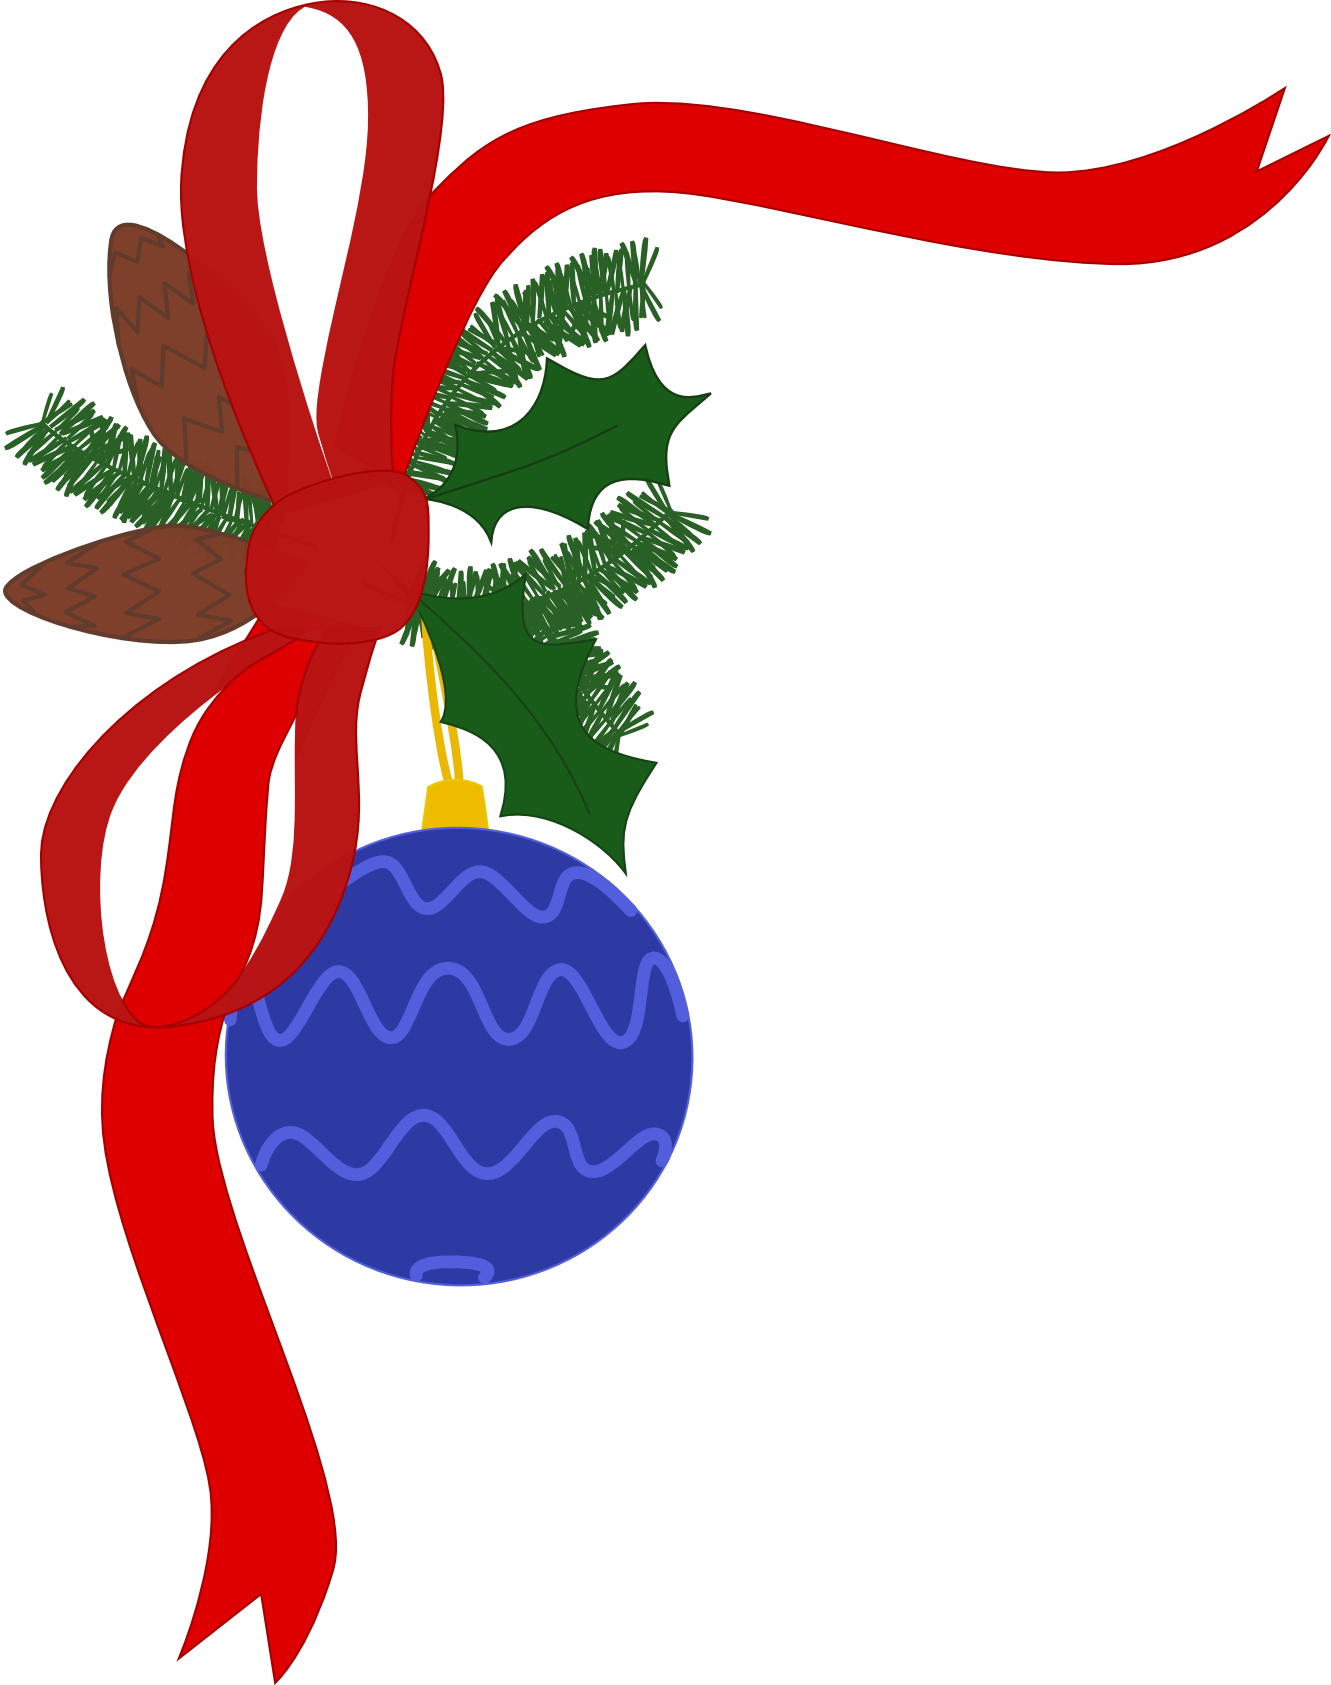 Clipart Christmas Decorations | Clipart library - Free Clipart Images